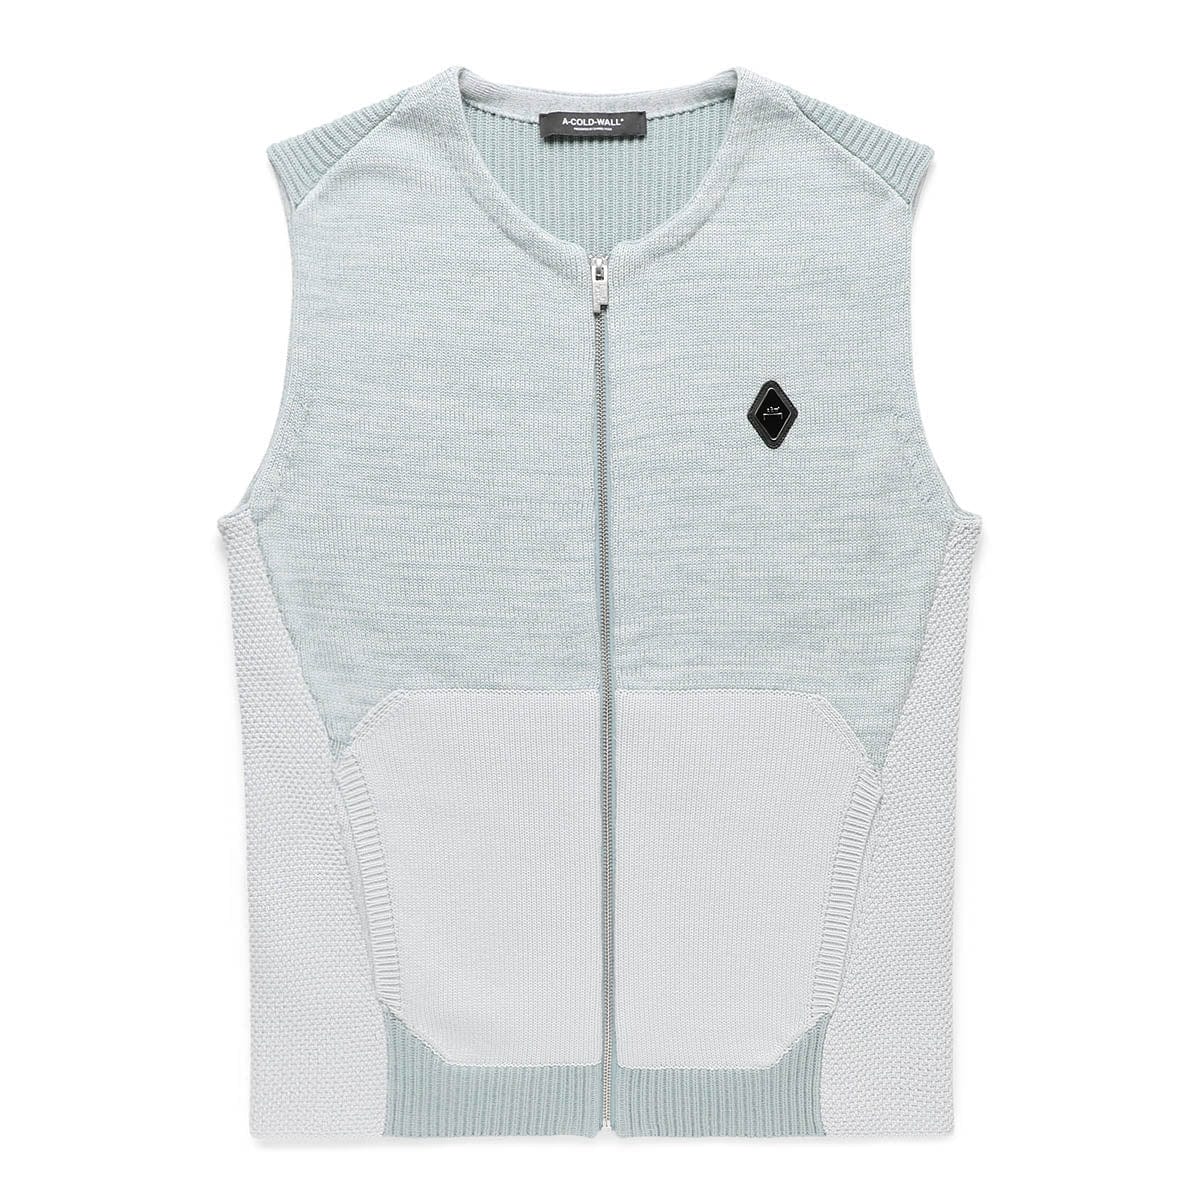 A COLD WALL* Outerwear CONTRAST TECH KNIT VEST